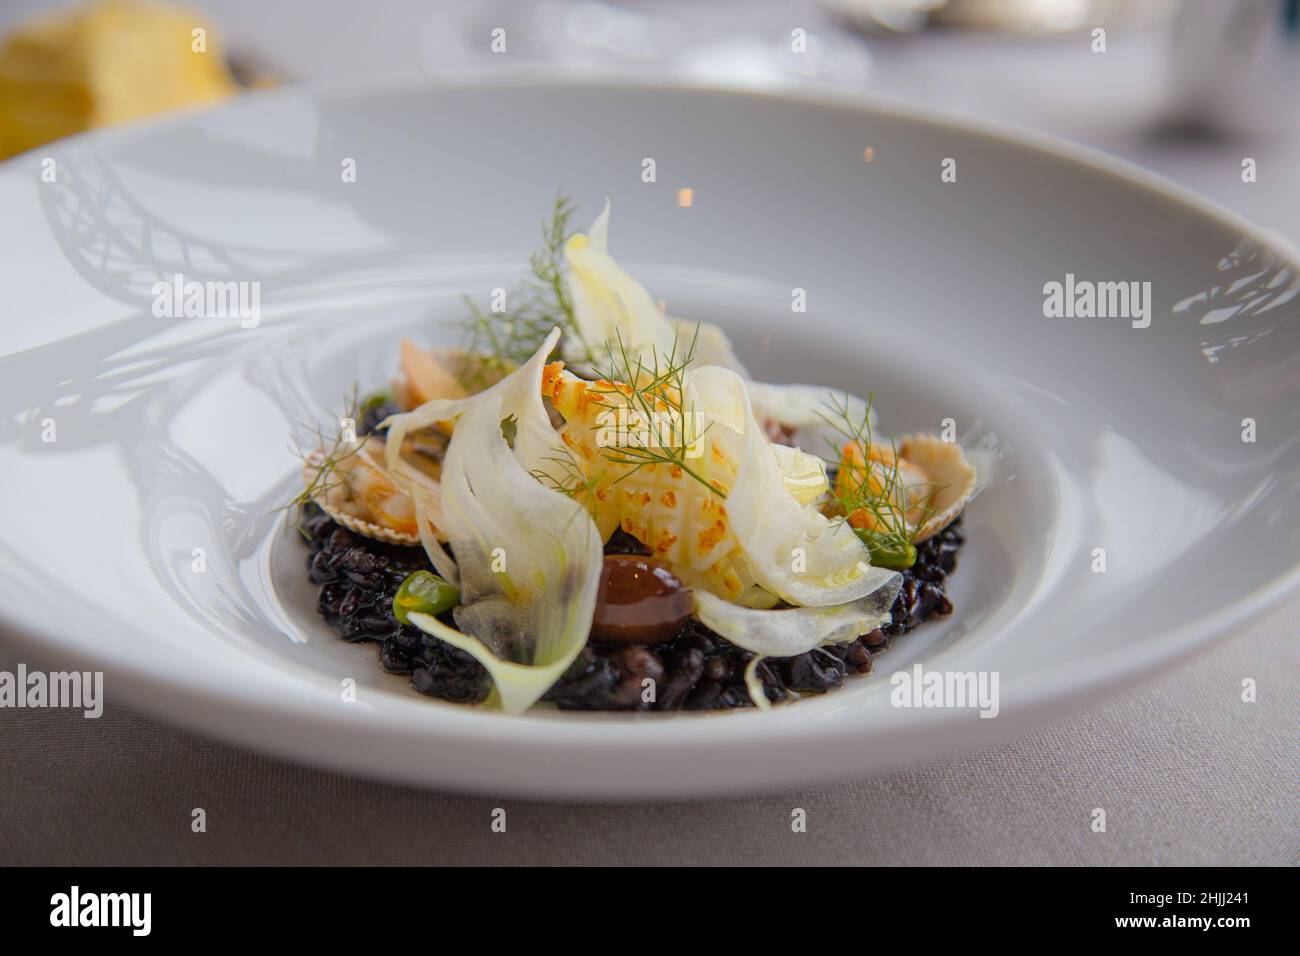 A beautifully plated gourmet seafood dish. Stock Photo